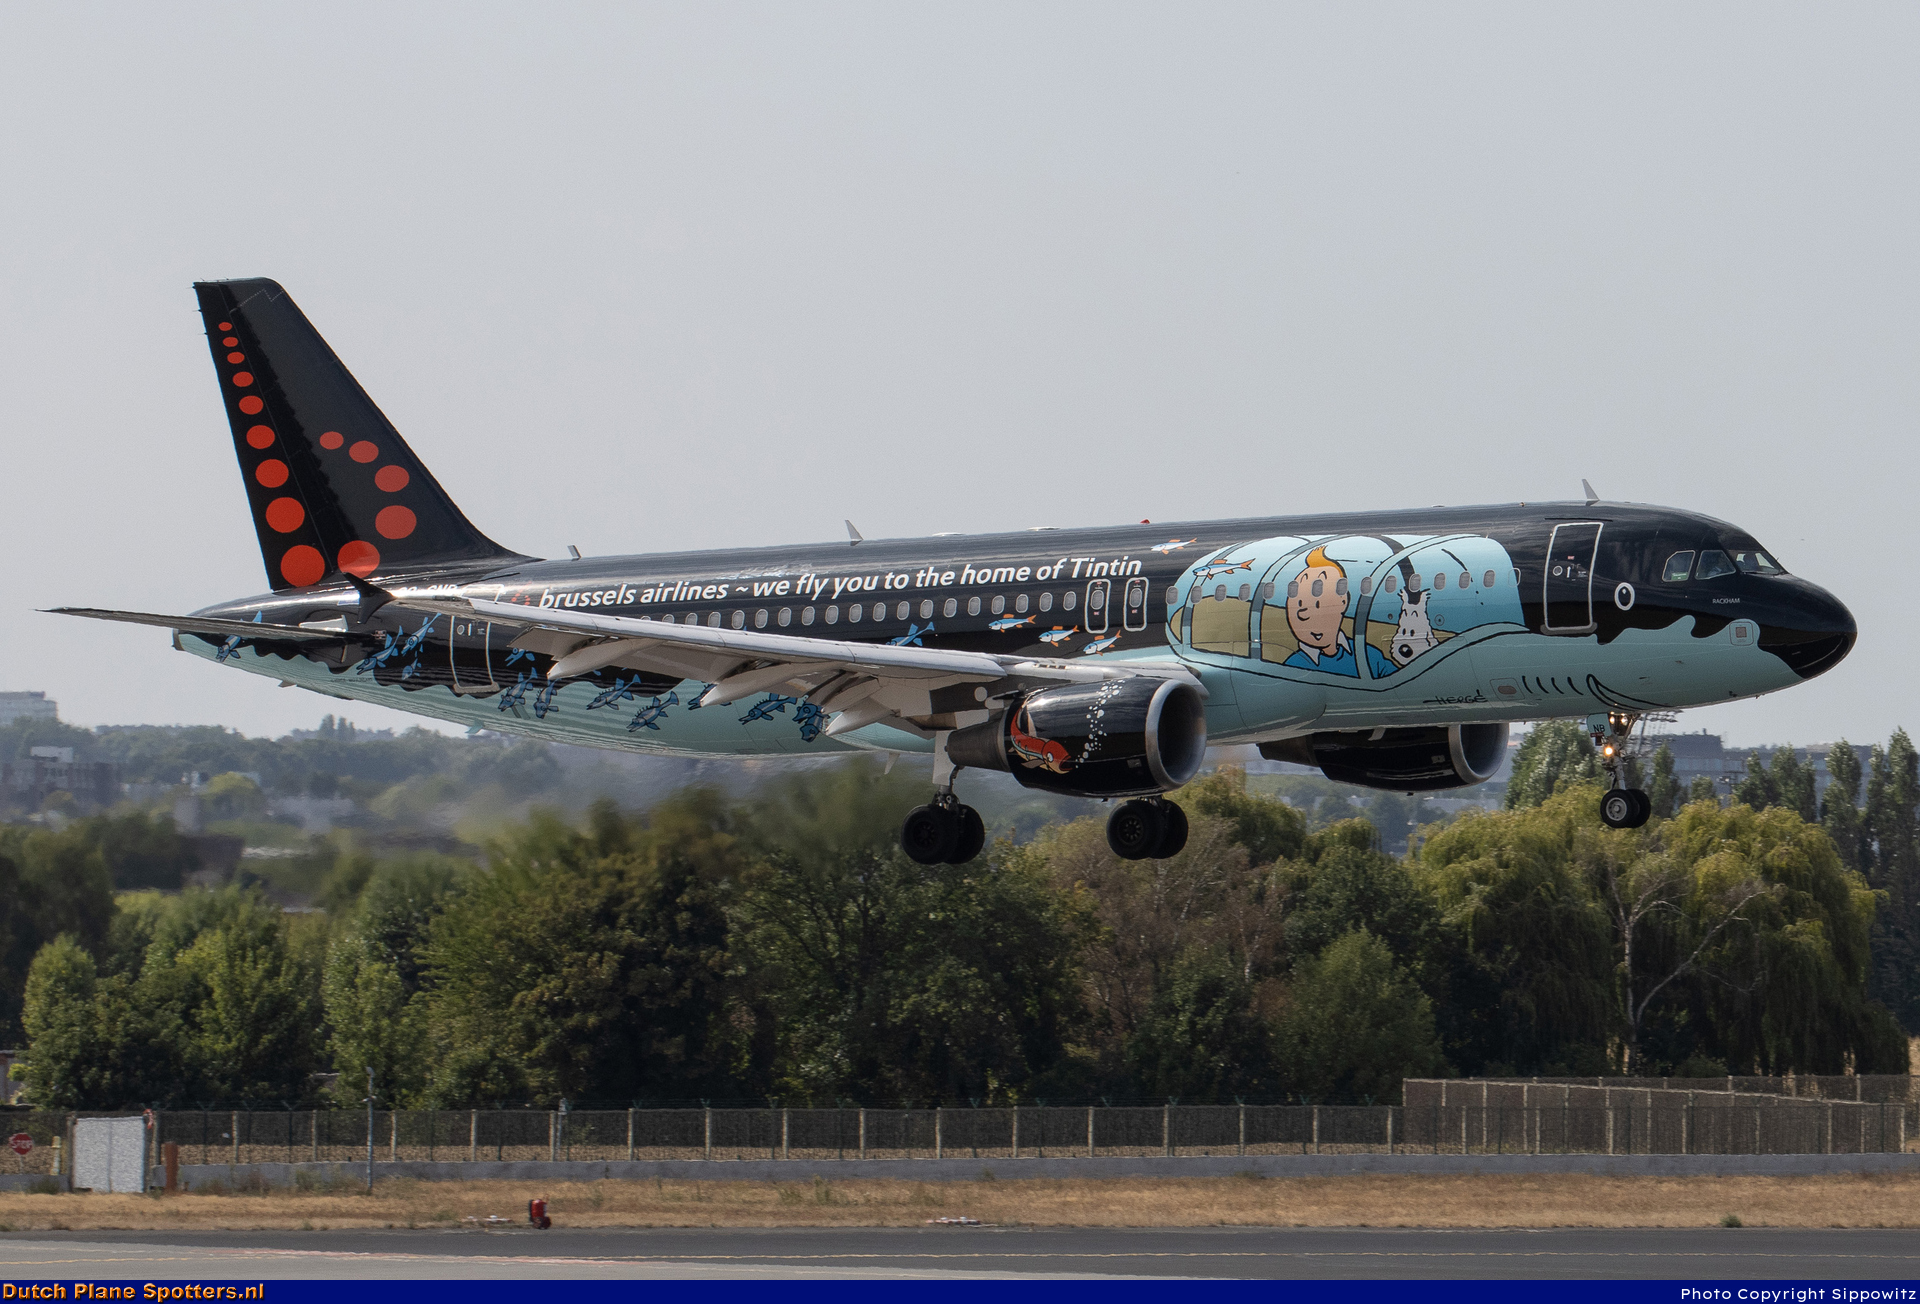 OO-SNB Airbus A320 Brussels Airlines by Sippowitz